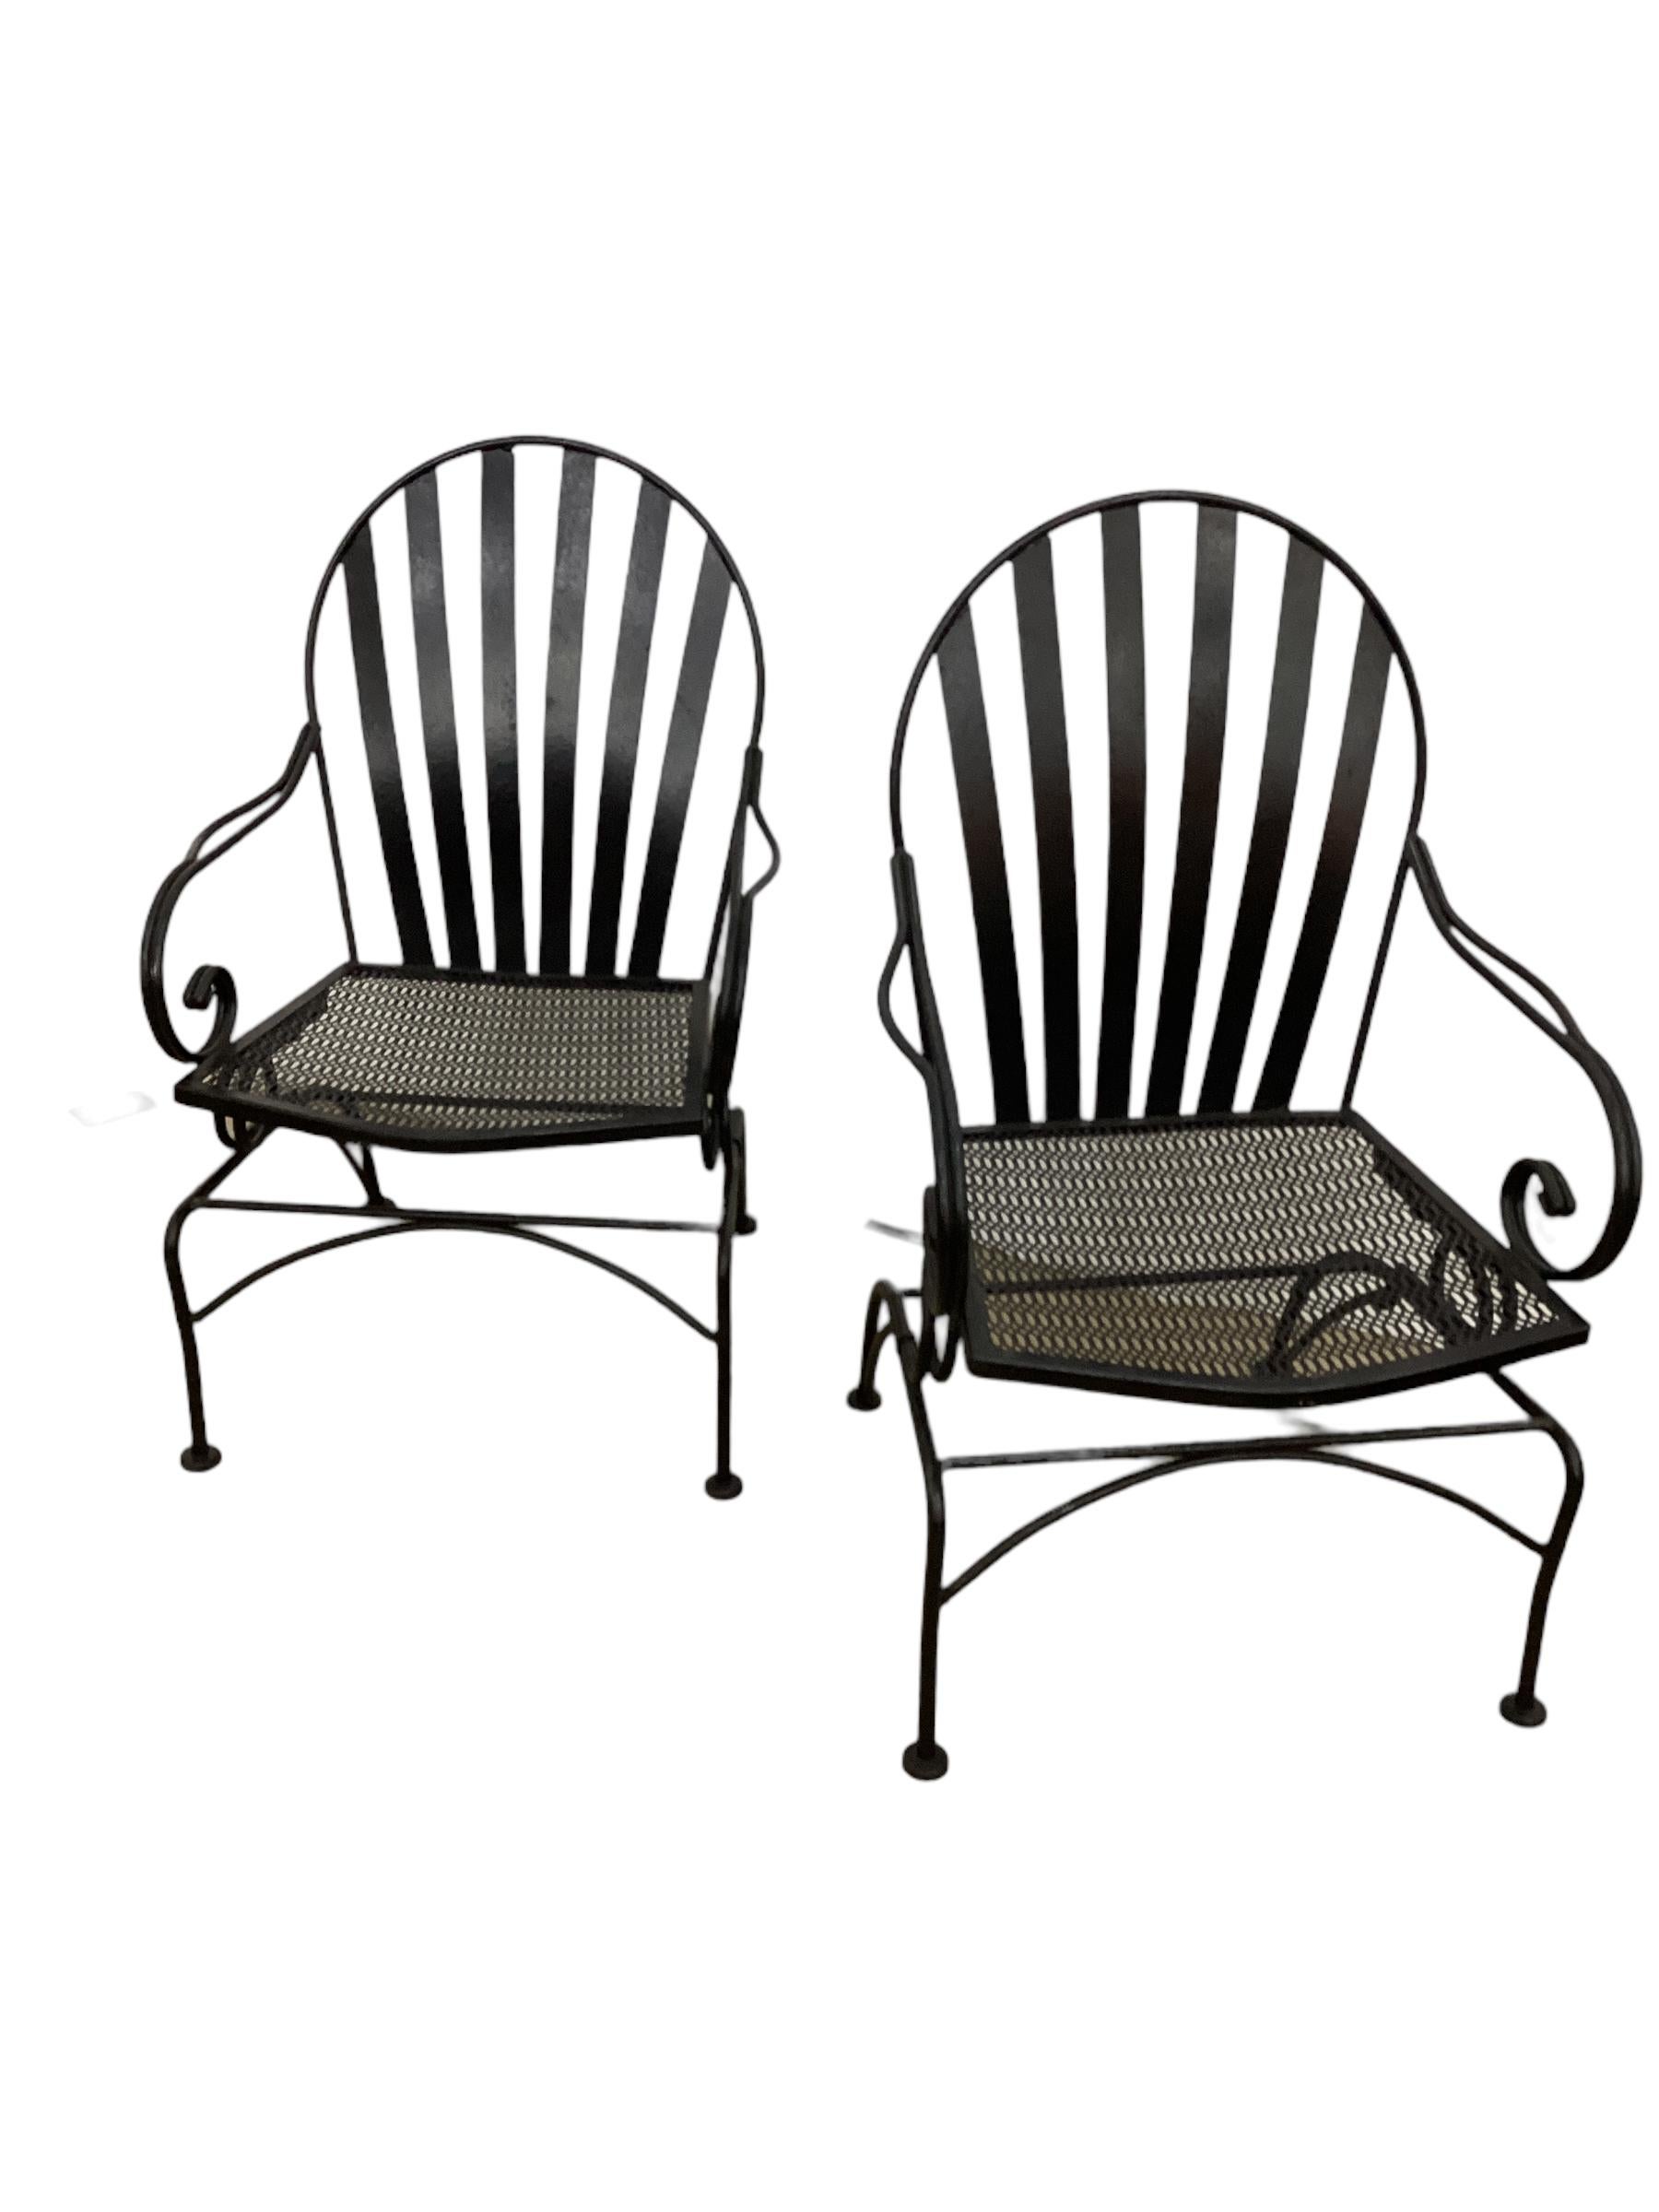 Pair of Vintage Iron Cantilevered Chairs with mesh seats and slat backs. Please contact us for competitive shipping quotes.